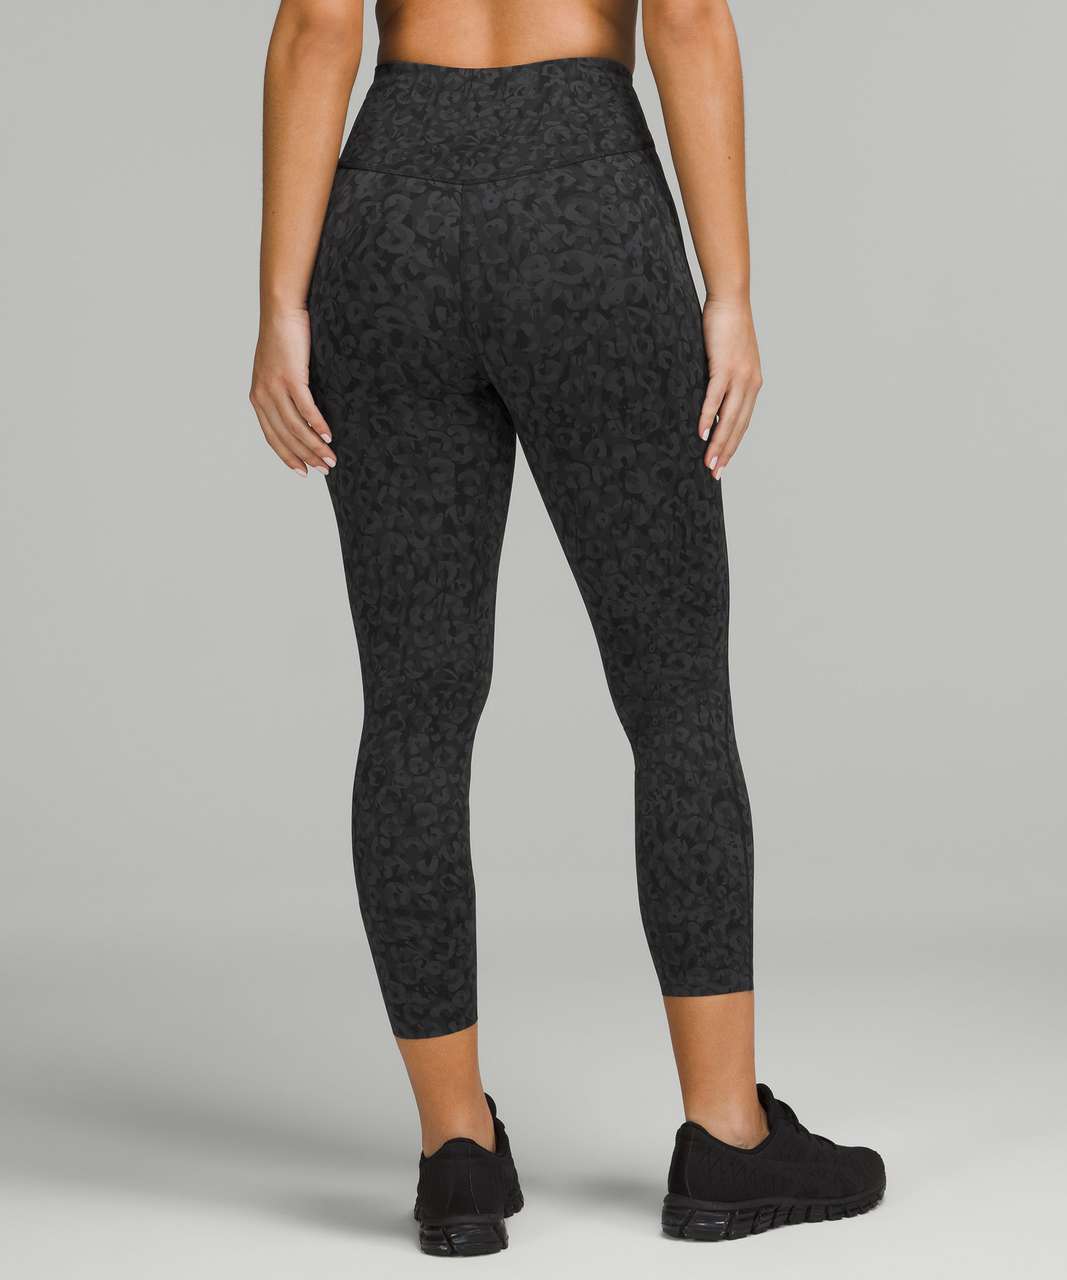 lululemon Align™ High-Rise Pant 24 *Asia Fit, Wild Thing Camo Deep Coal  Multi